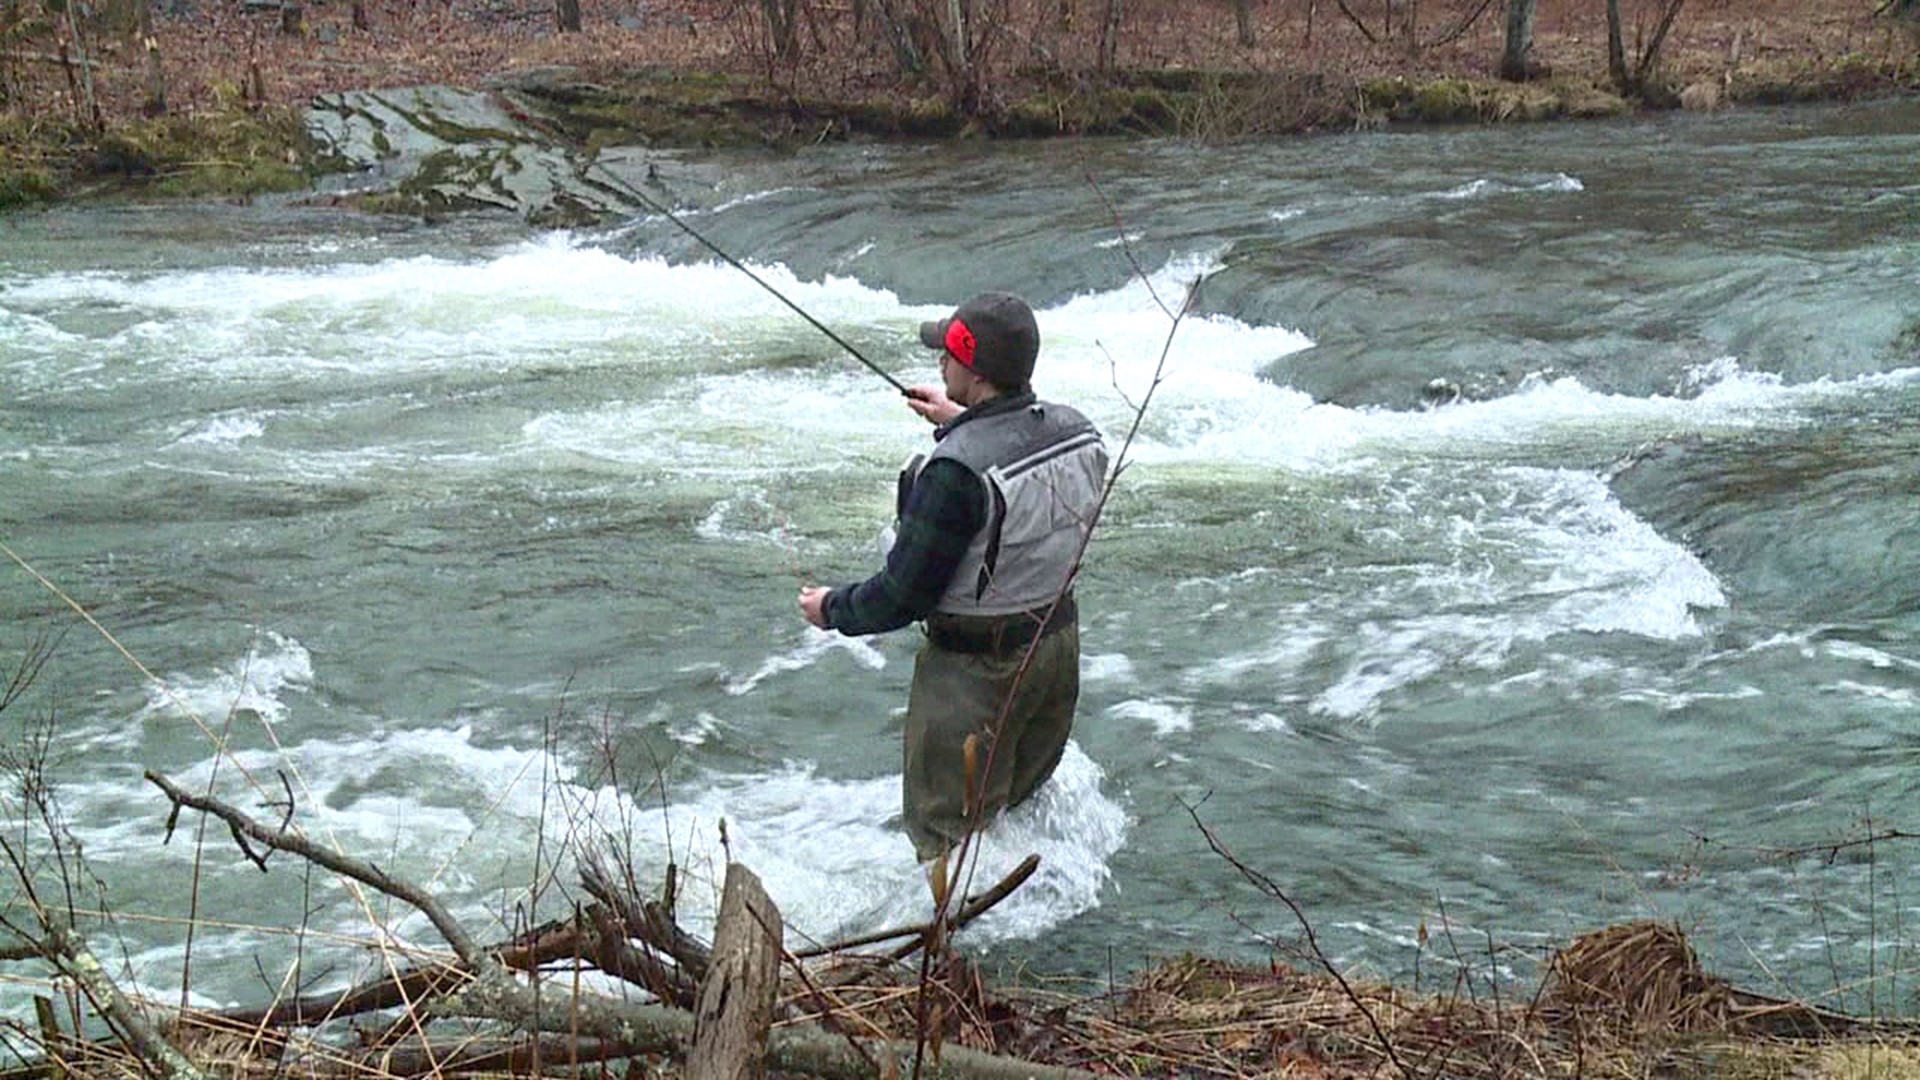 Saturday marked the first day of trout season, and lots of anglers were out fishing on the Lackawanna River.